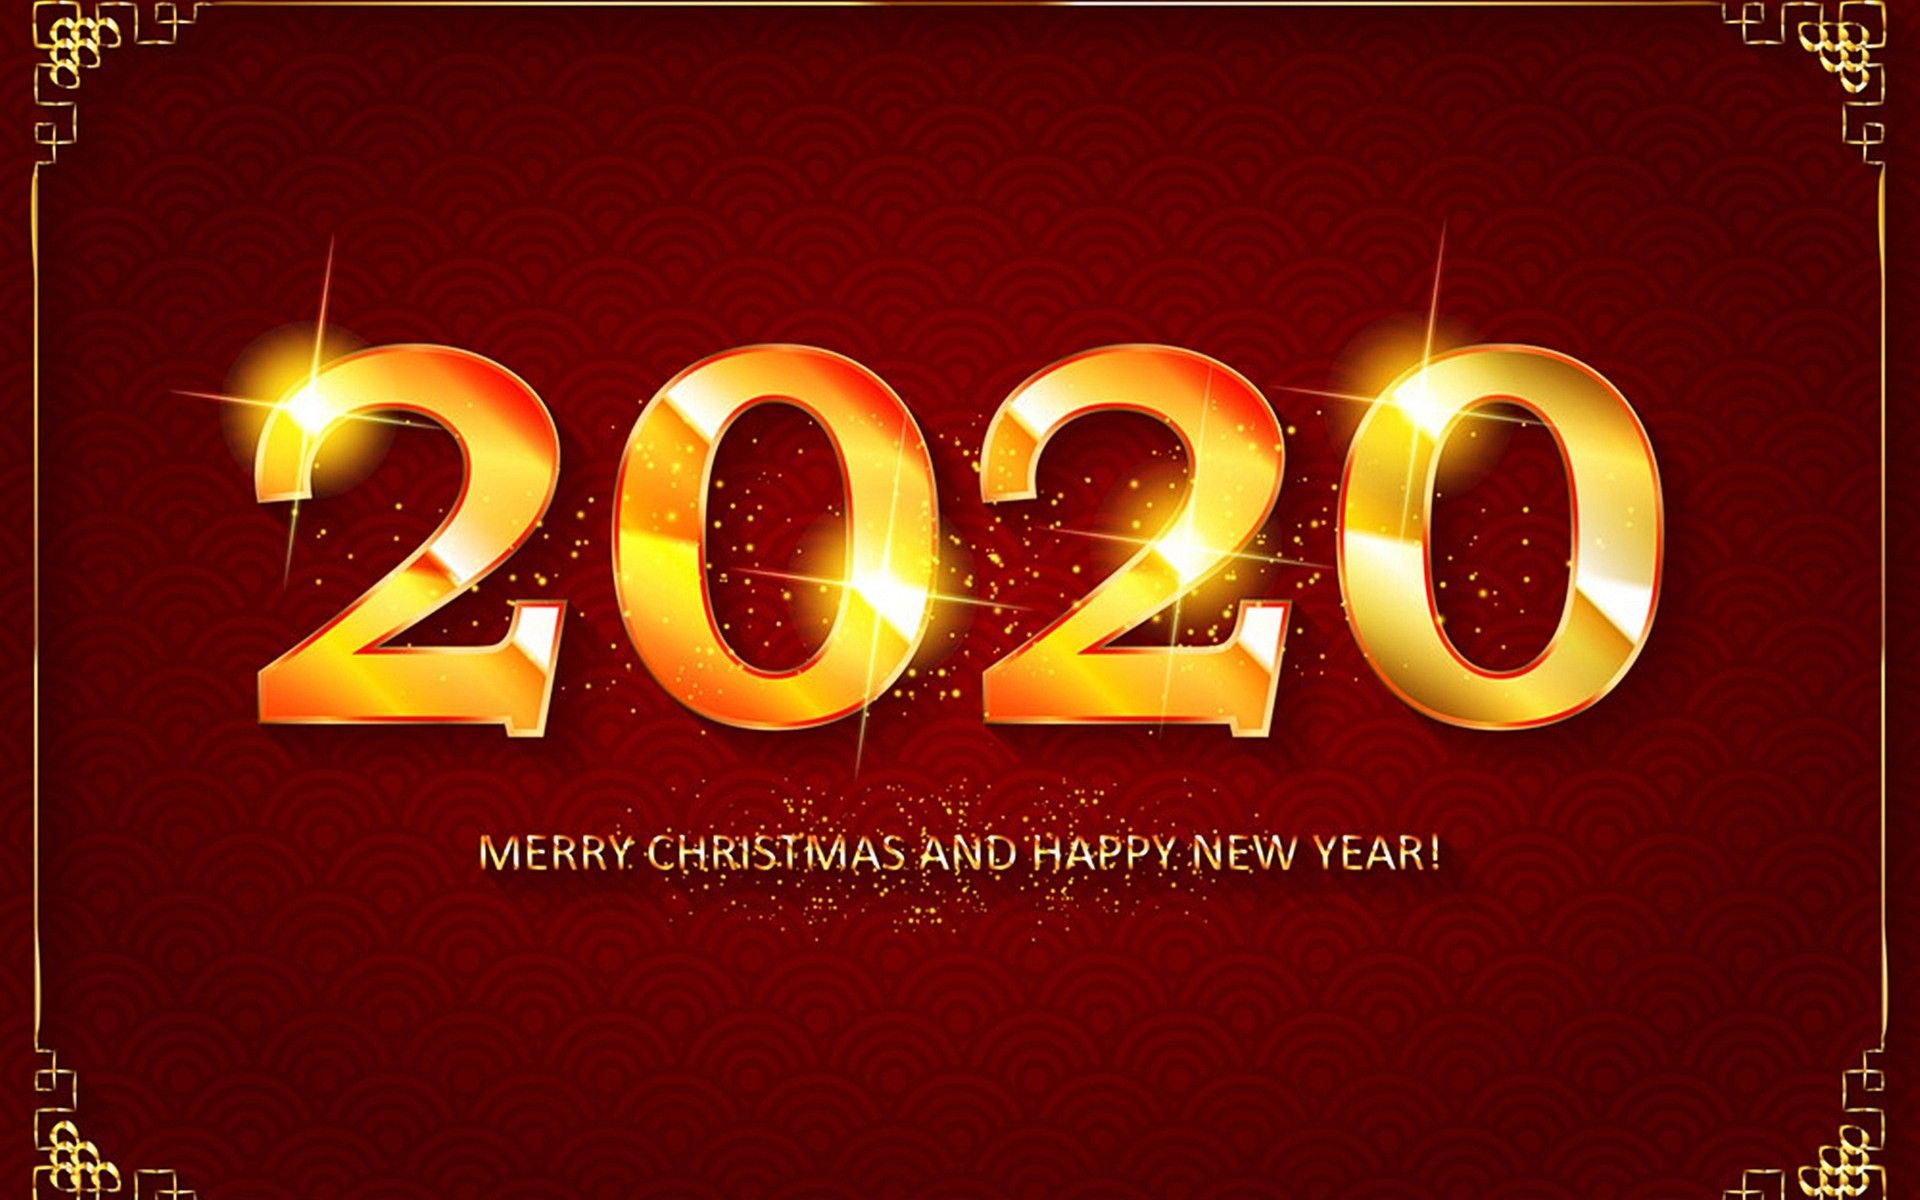 Happy New Year 2020 Wallpapers   Top Free Happy New Year 2020